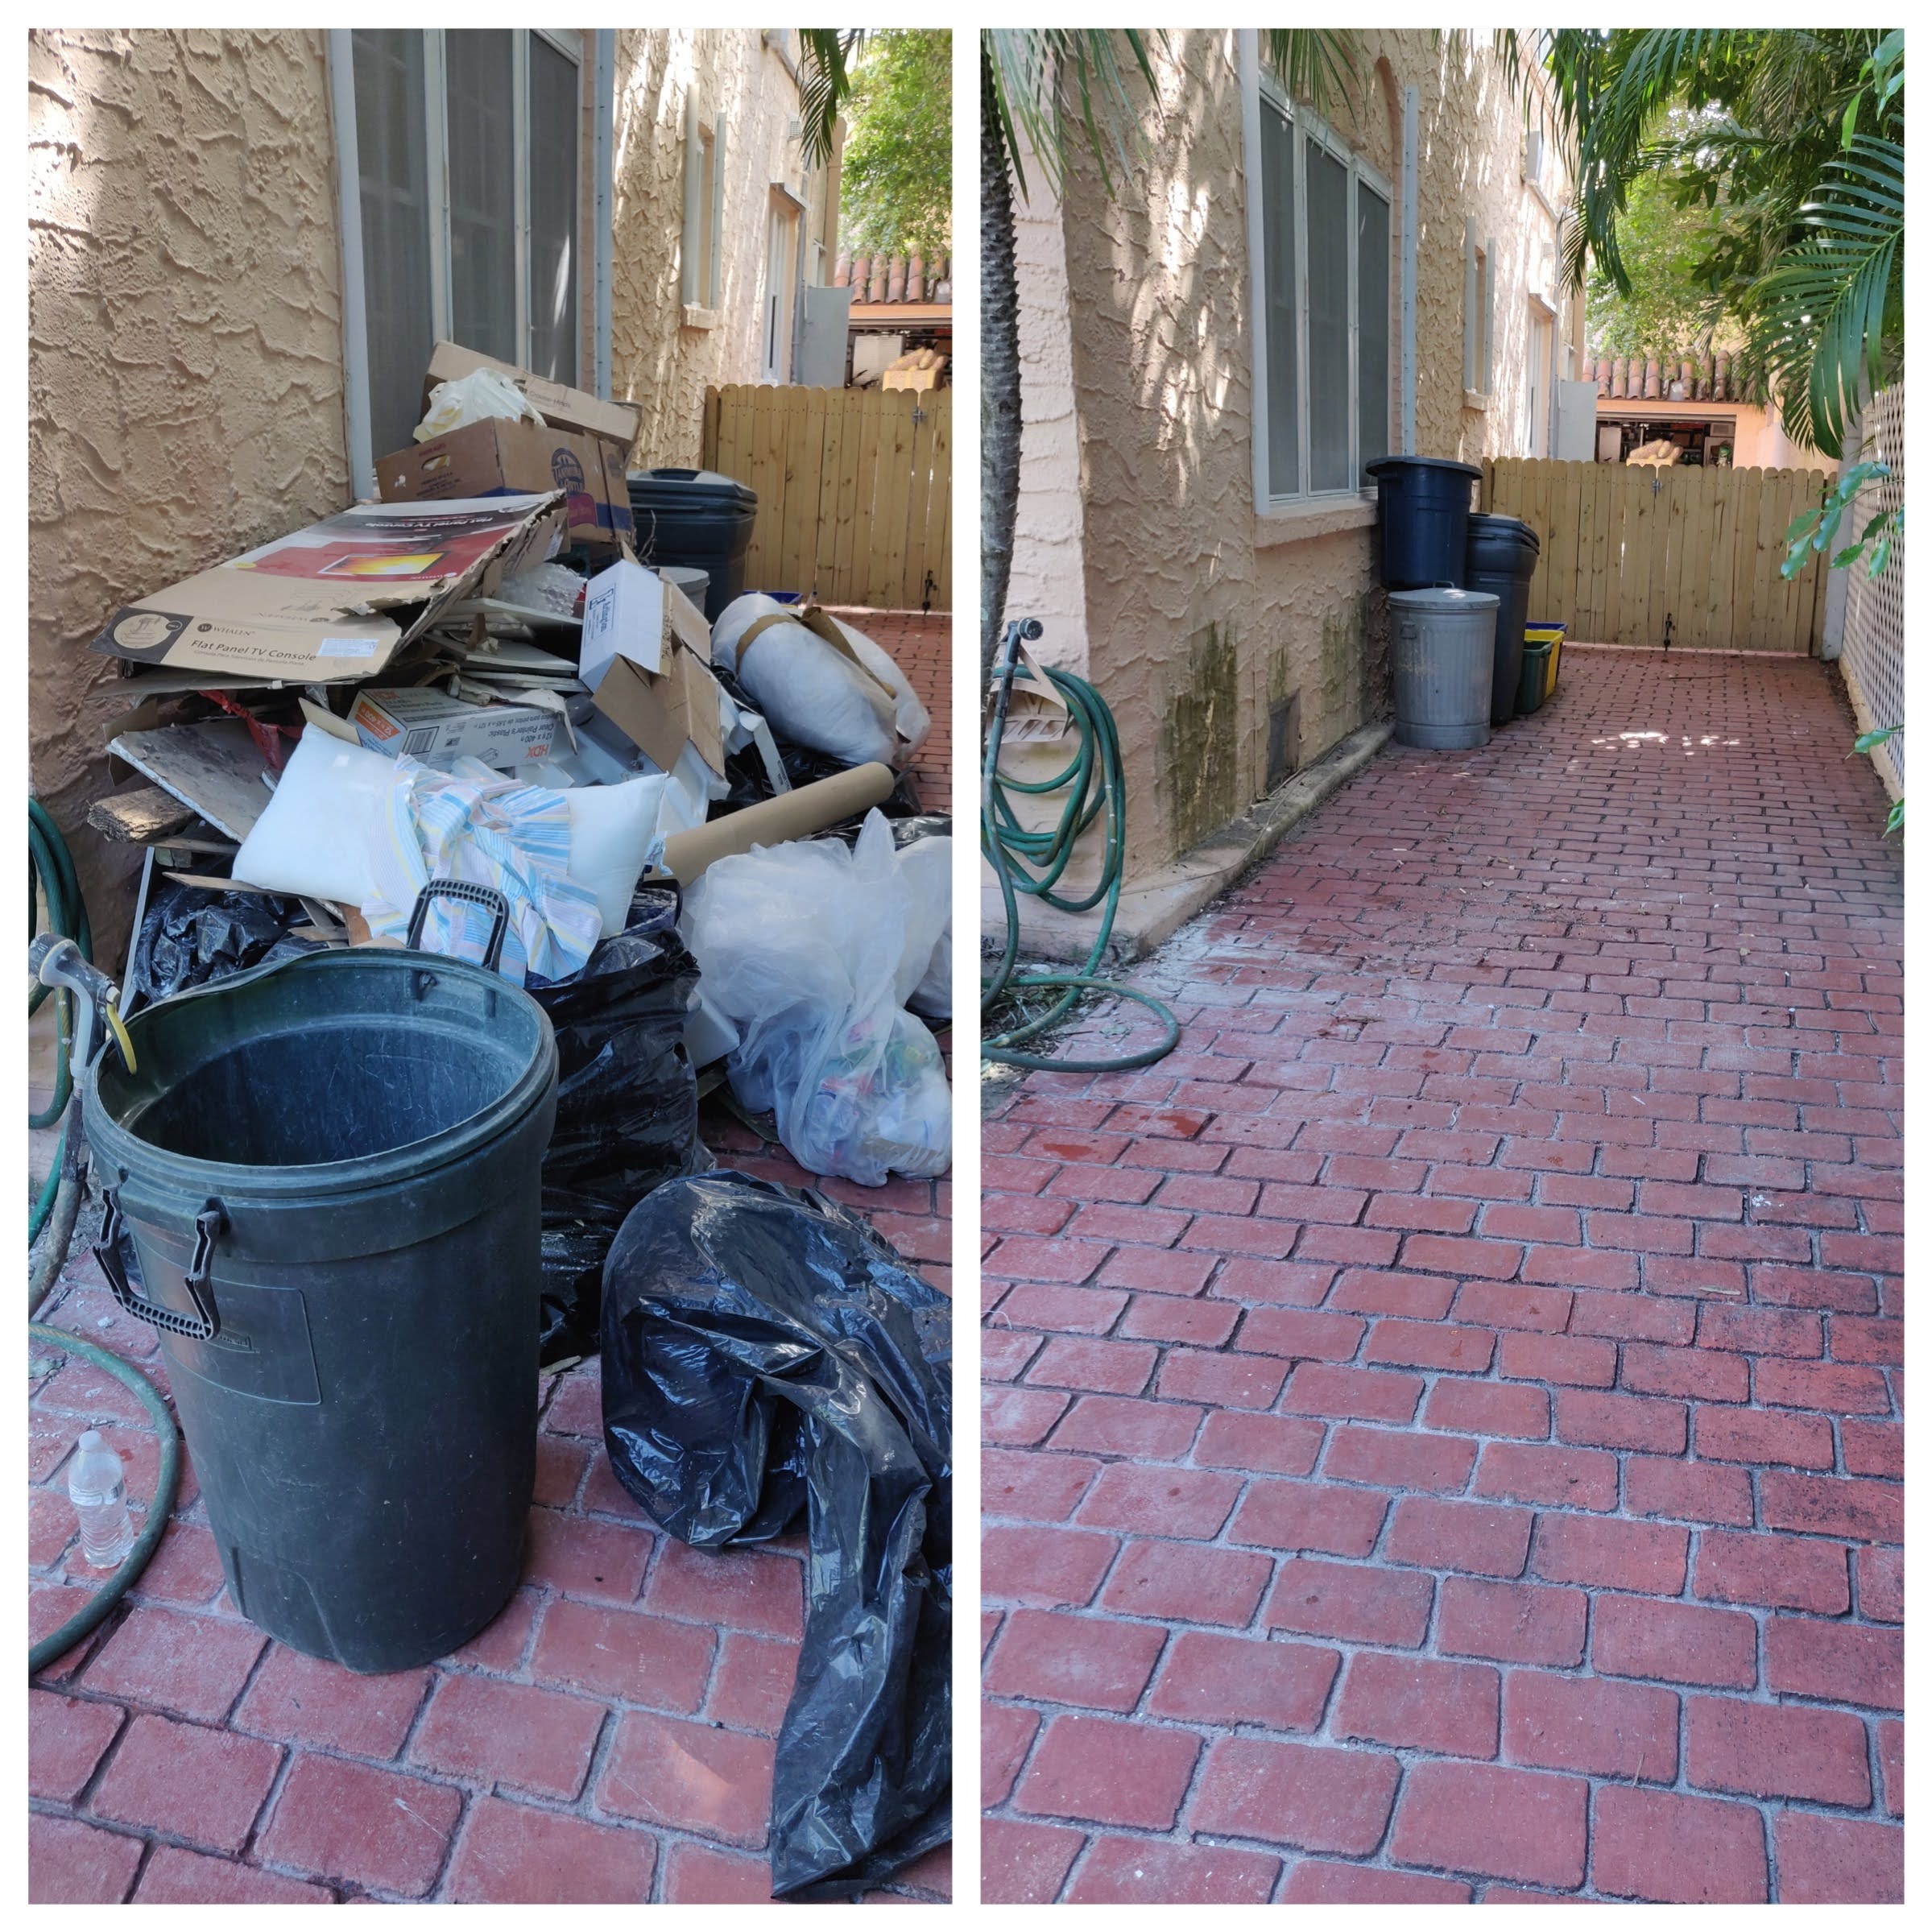 Renovation Debris like Cardboard, Bags, and Trash from side of house in Palm Beach, Florida